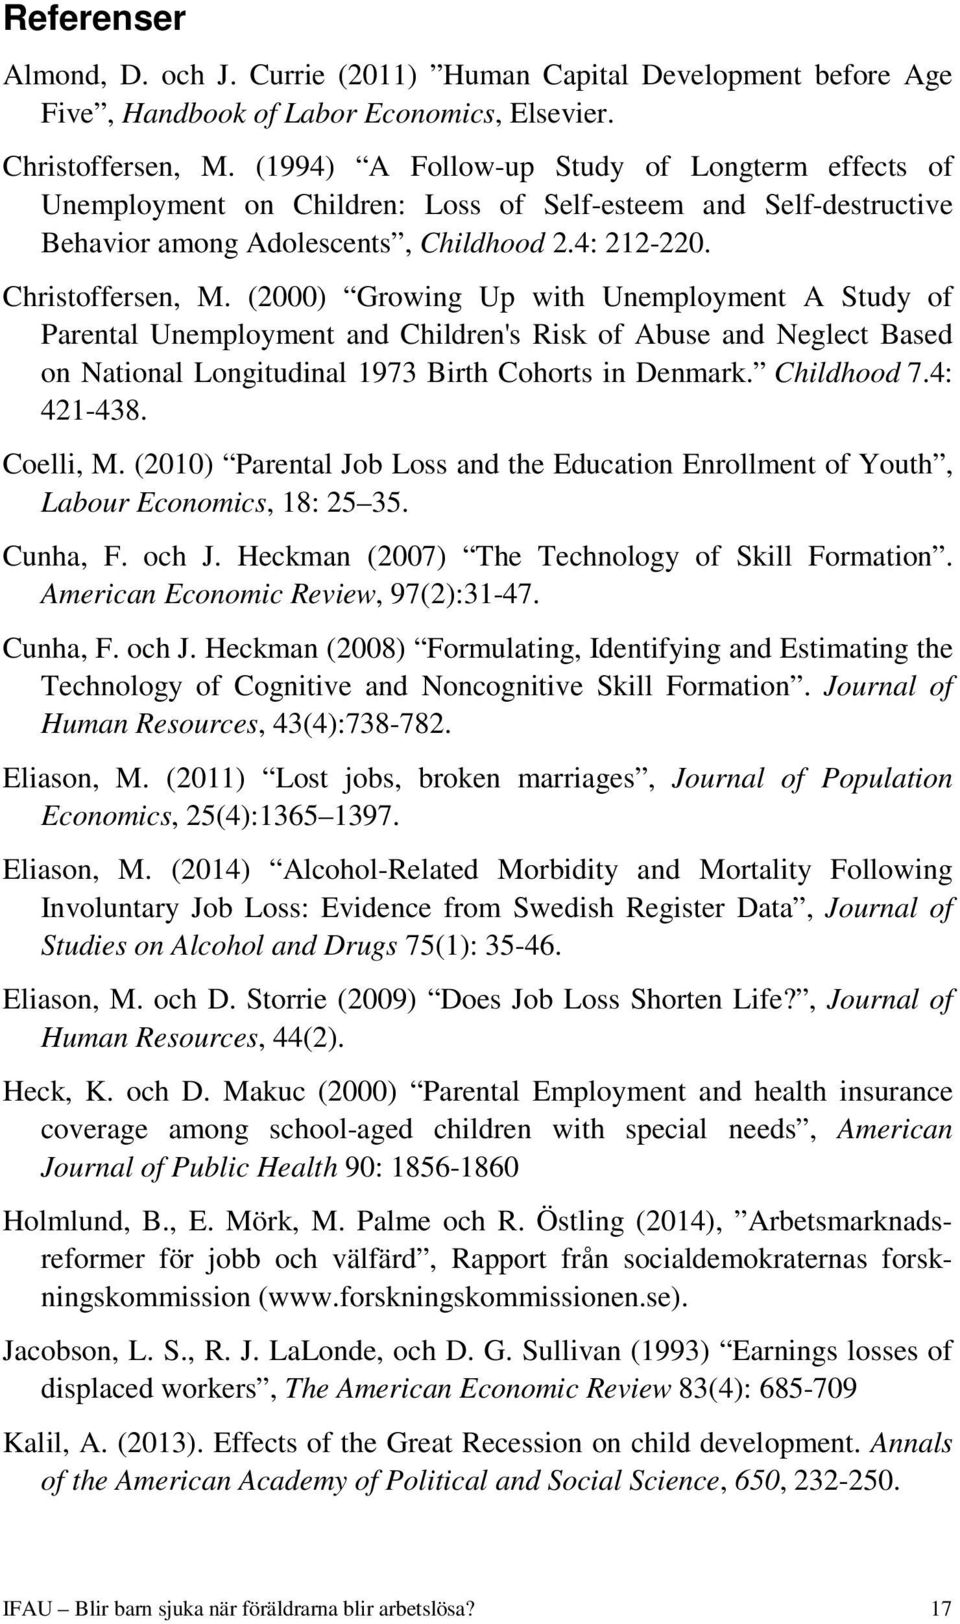 (2000) Growing Up with Unemployment A Study of Parental Unemployment and Children's Risk of Abuse and Neglect Based on National Longitudinal 1973 Birth Cohorts in Denmark. Childhood 7.4: 421-438.